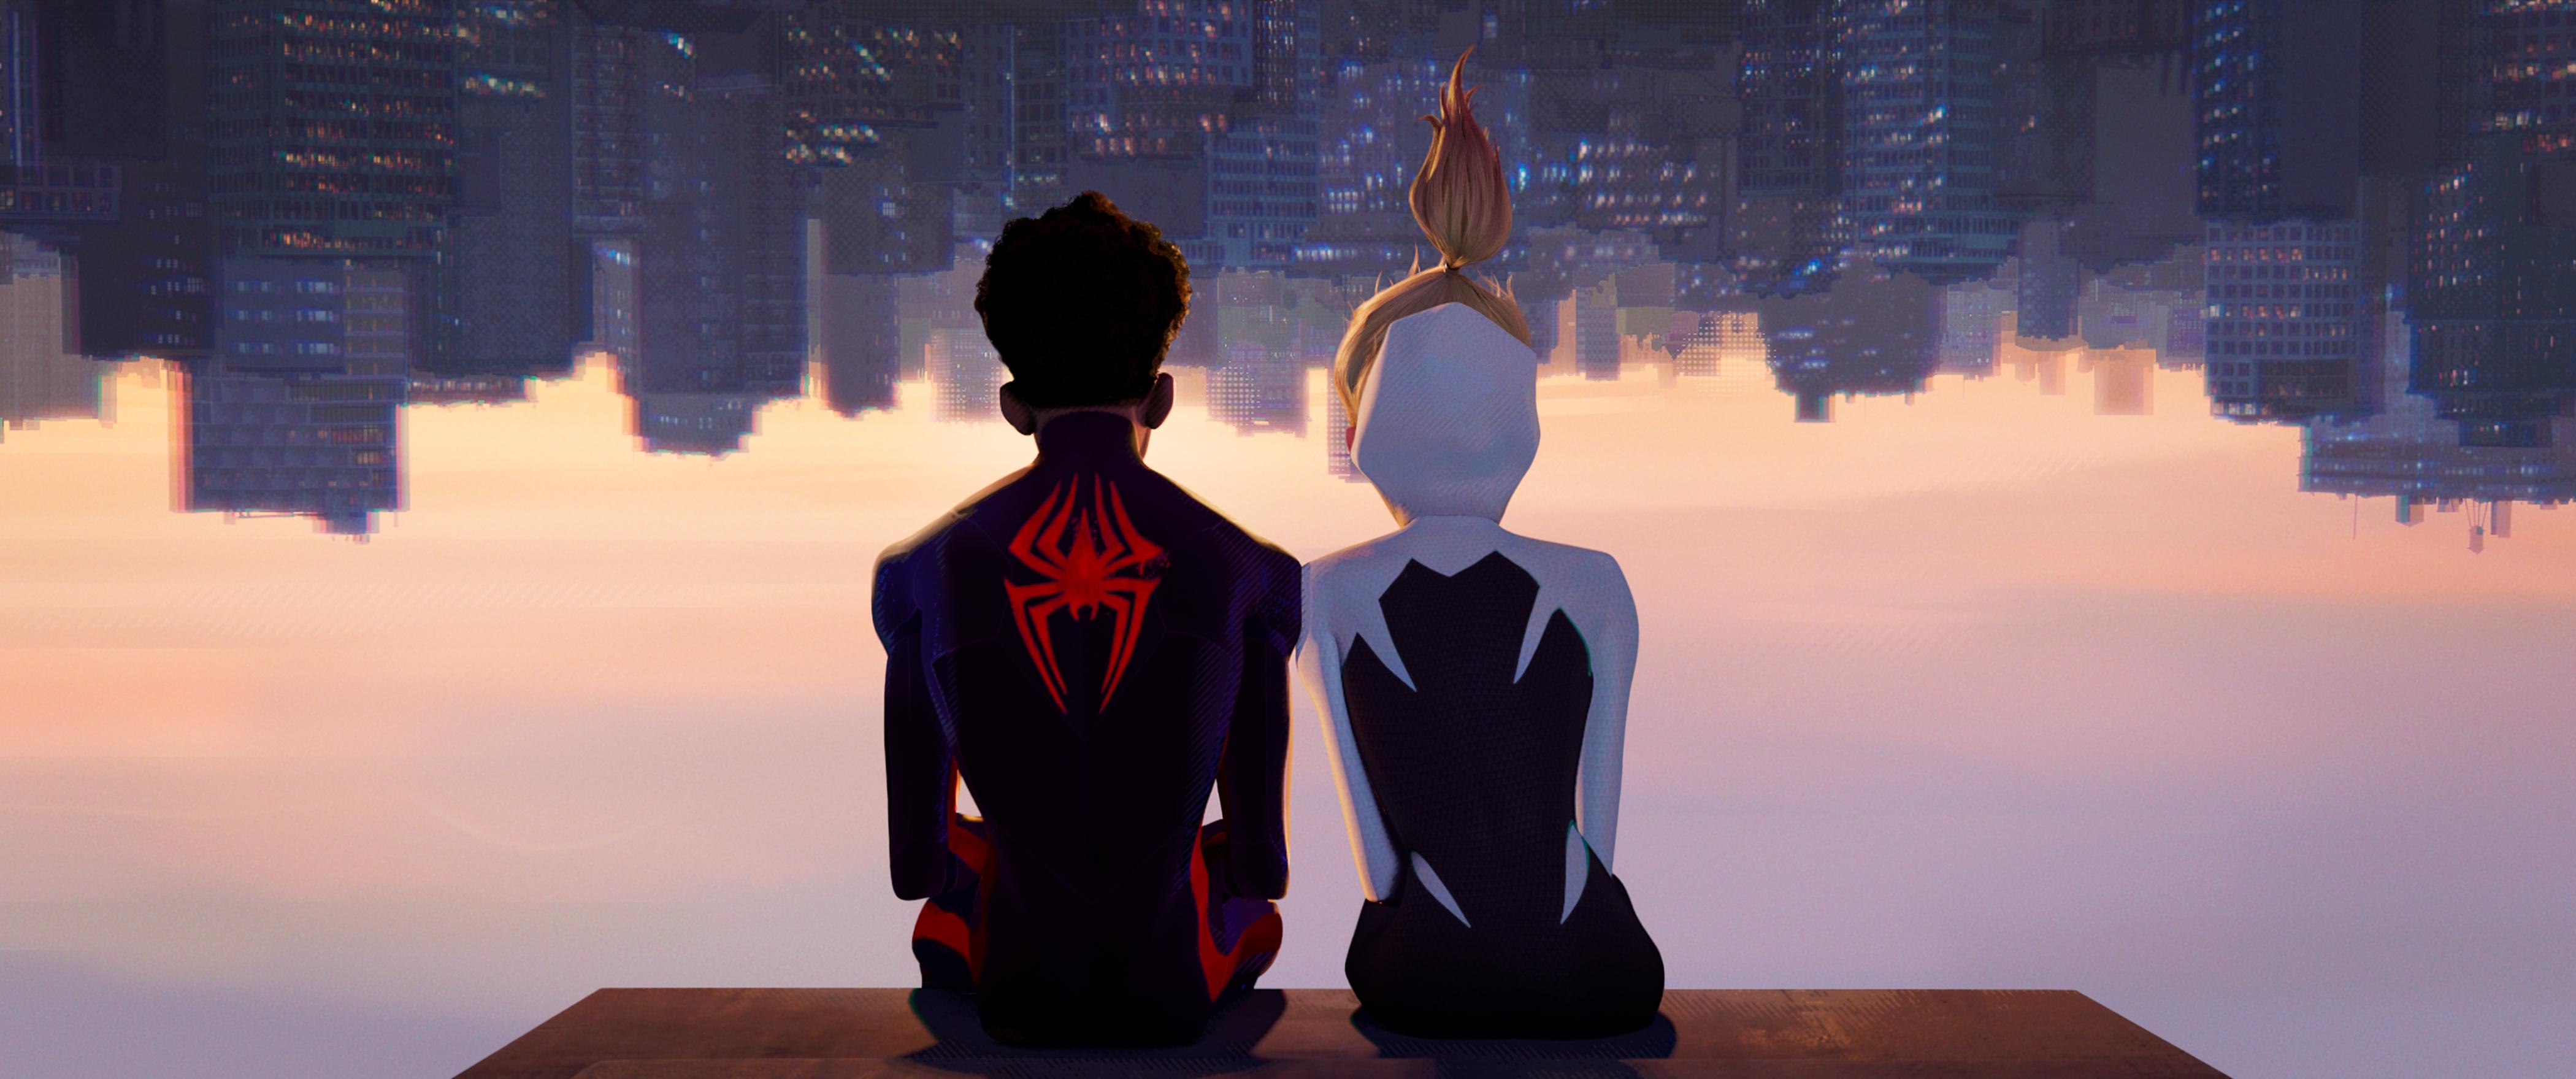 Spider Verse Heroes Contemplating Cityscape HD Wallpaper